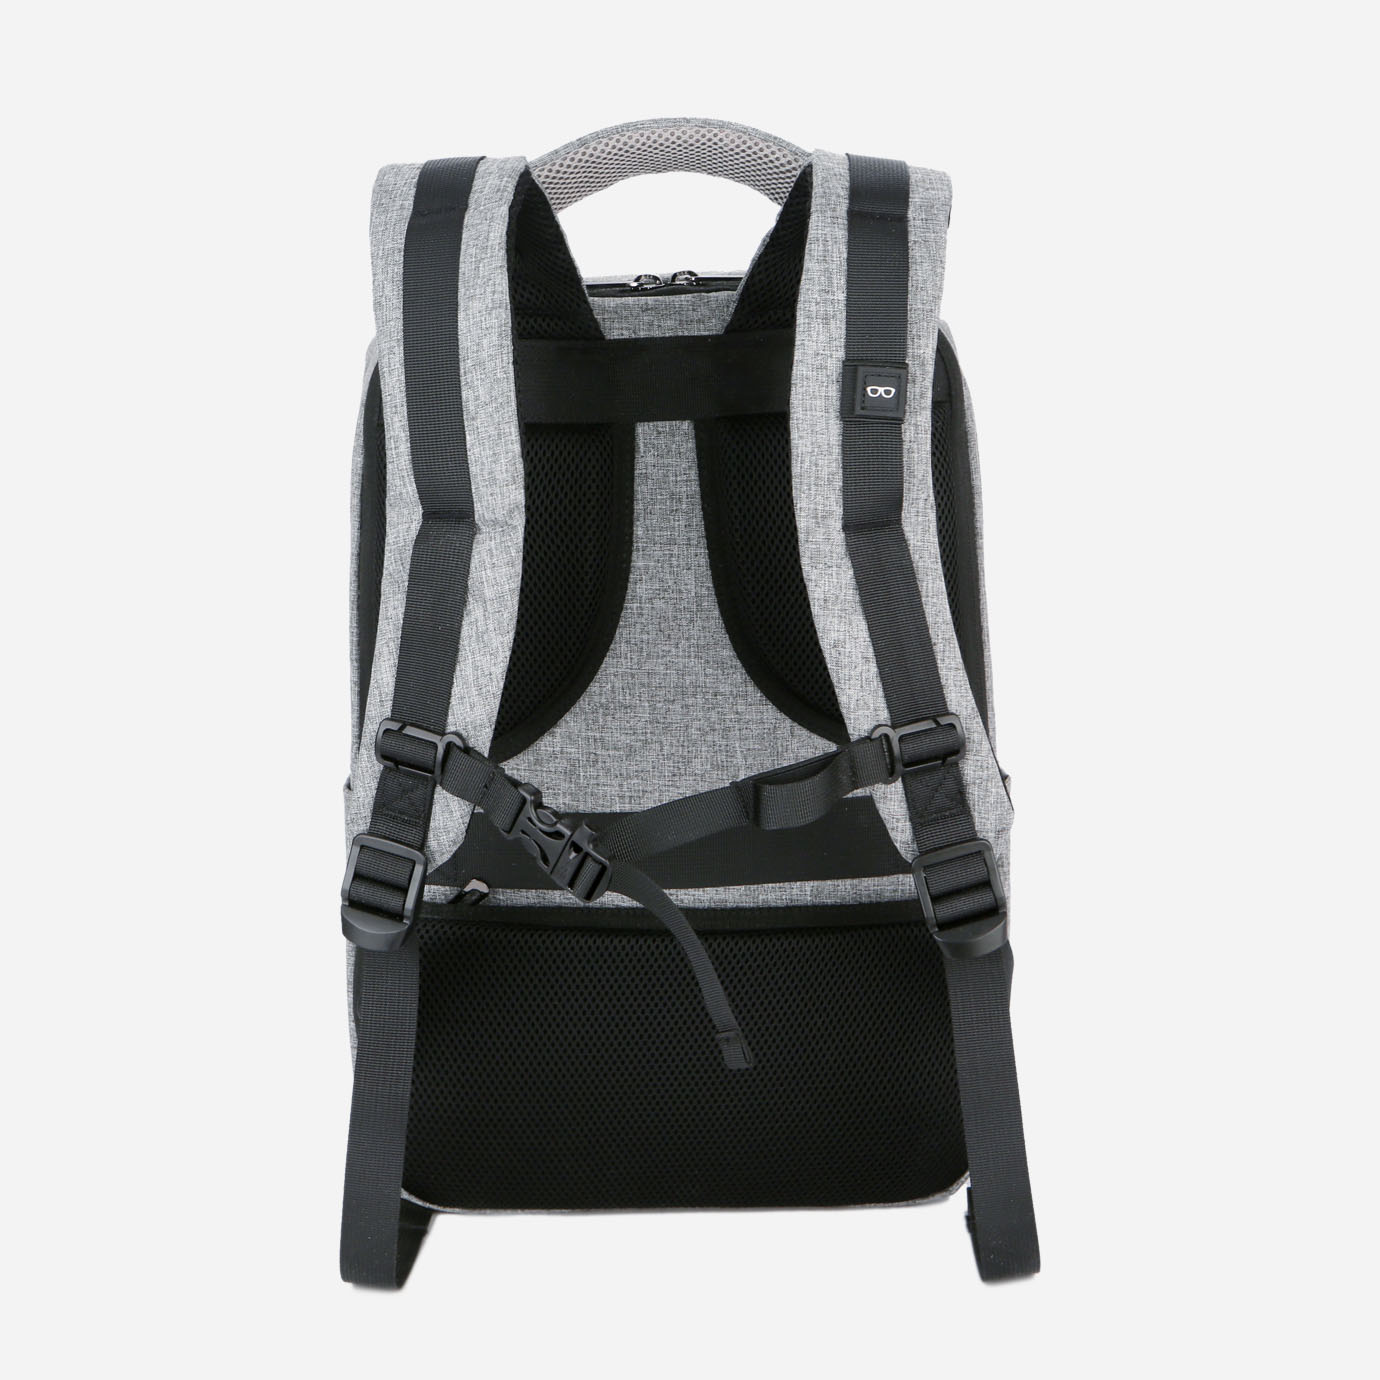 Nordace Nelson - Smart Travel Backpack